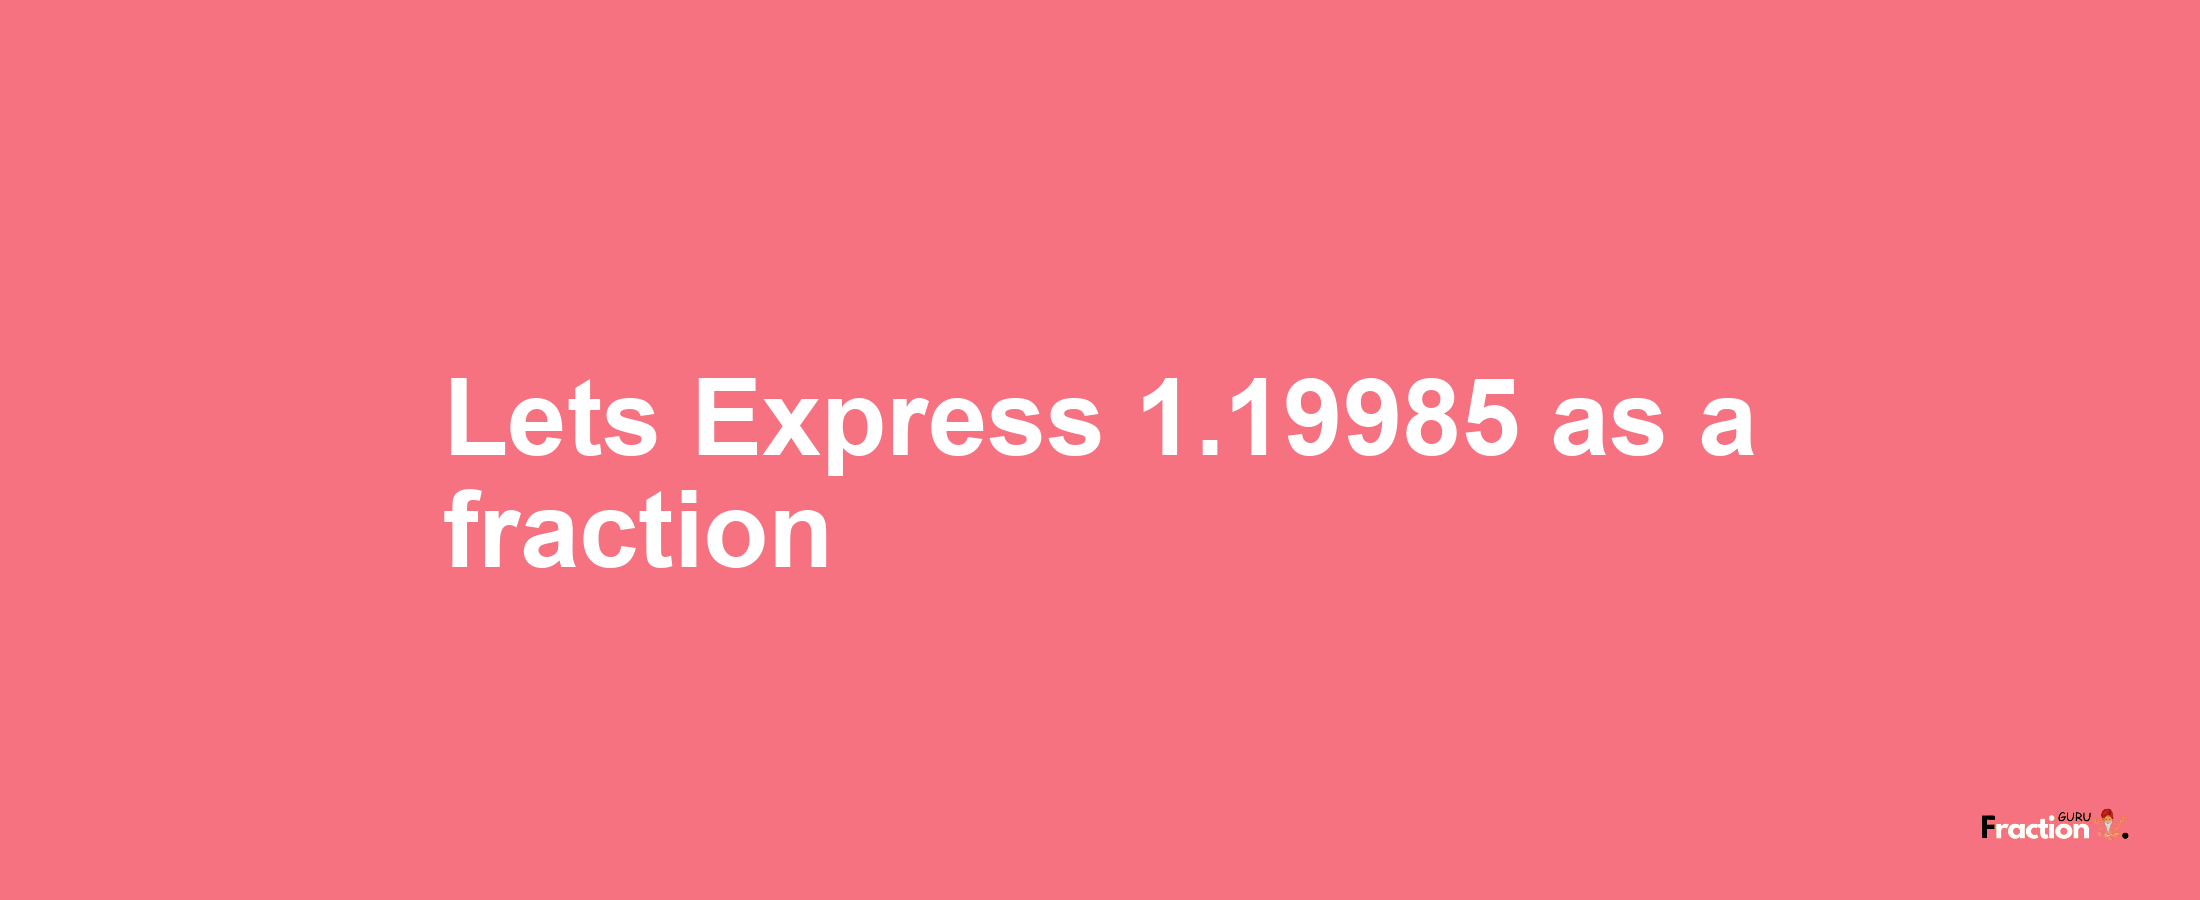 Lets Express 1.19985 as afraction